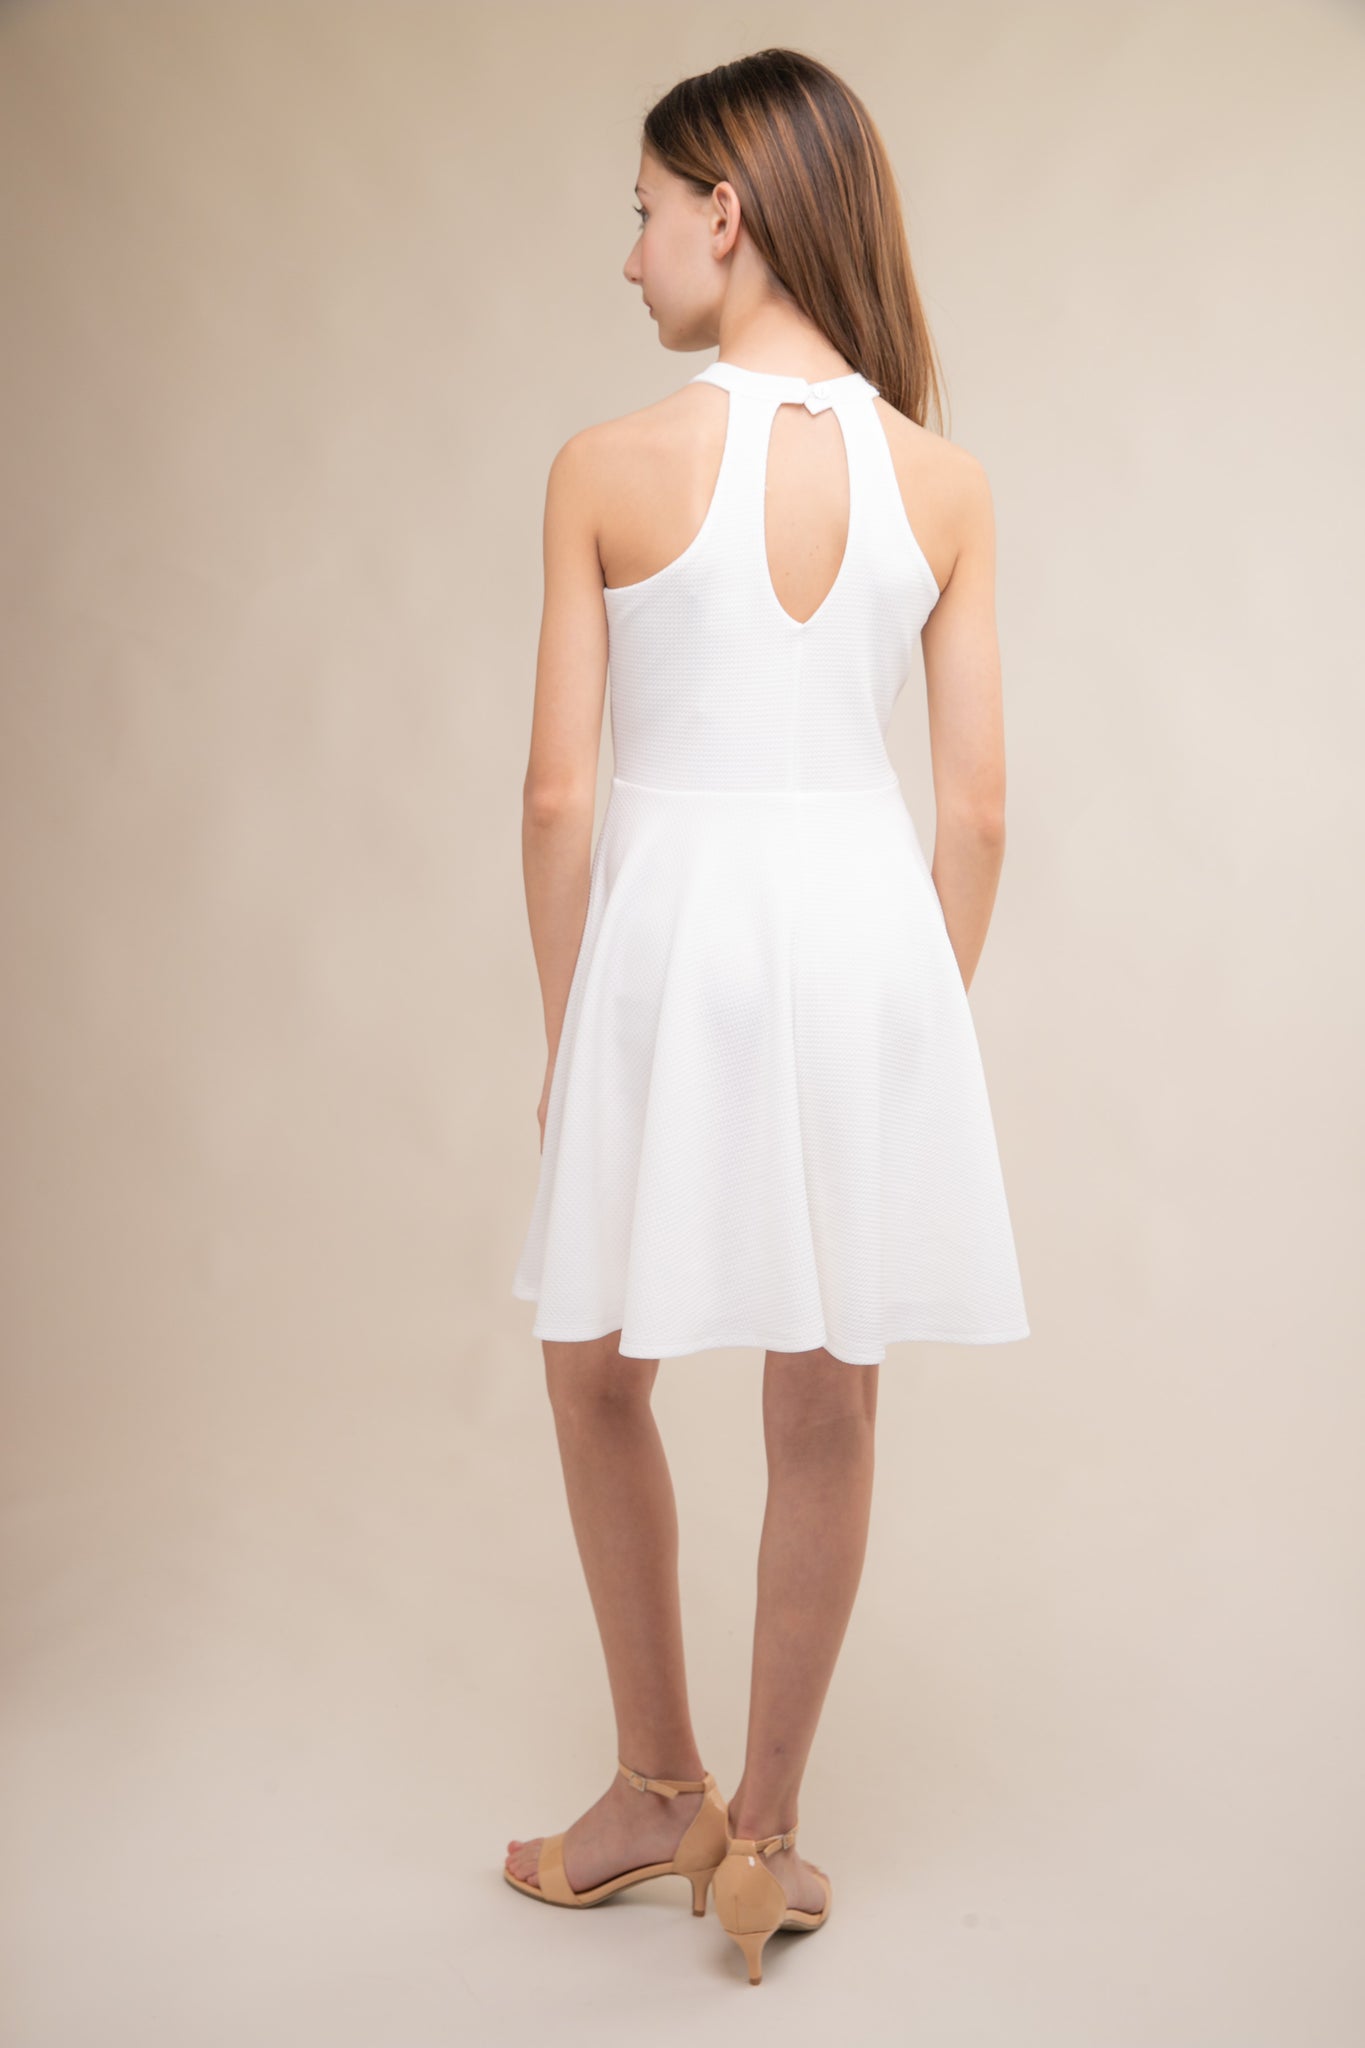 Halter dress in ivory features a full circle twirl skirt, open hole detailing in back and high waist line for a chic silhouette.